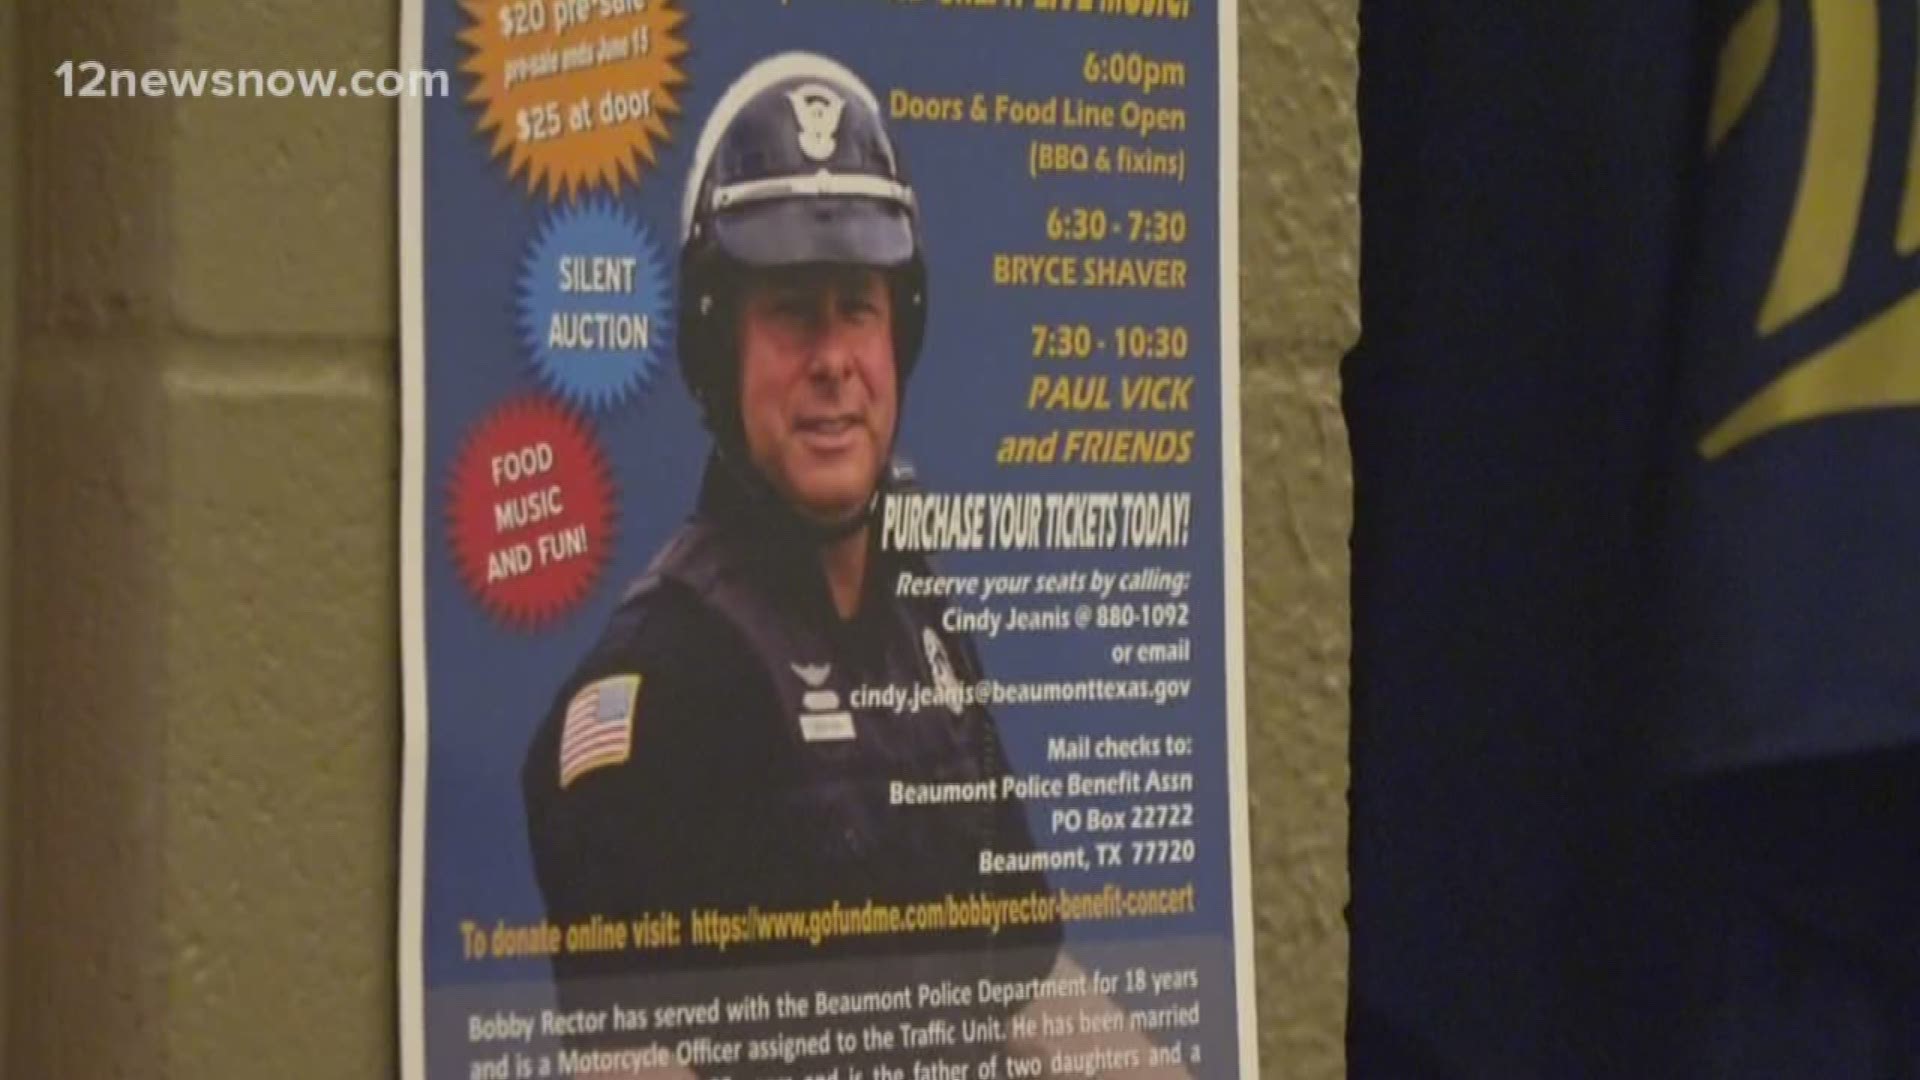 Beaumont Police Department hold benefit concert for officer recovering from cancer